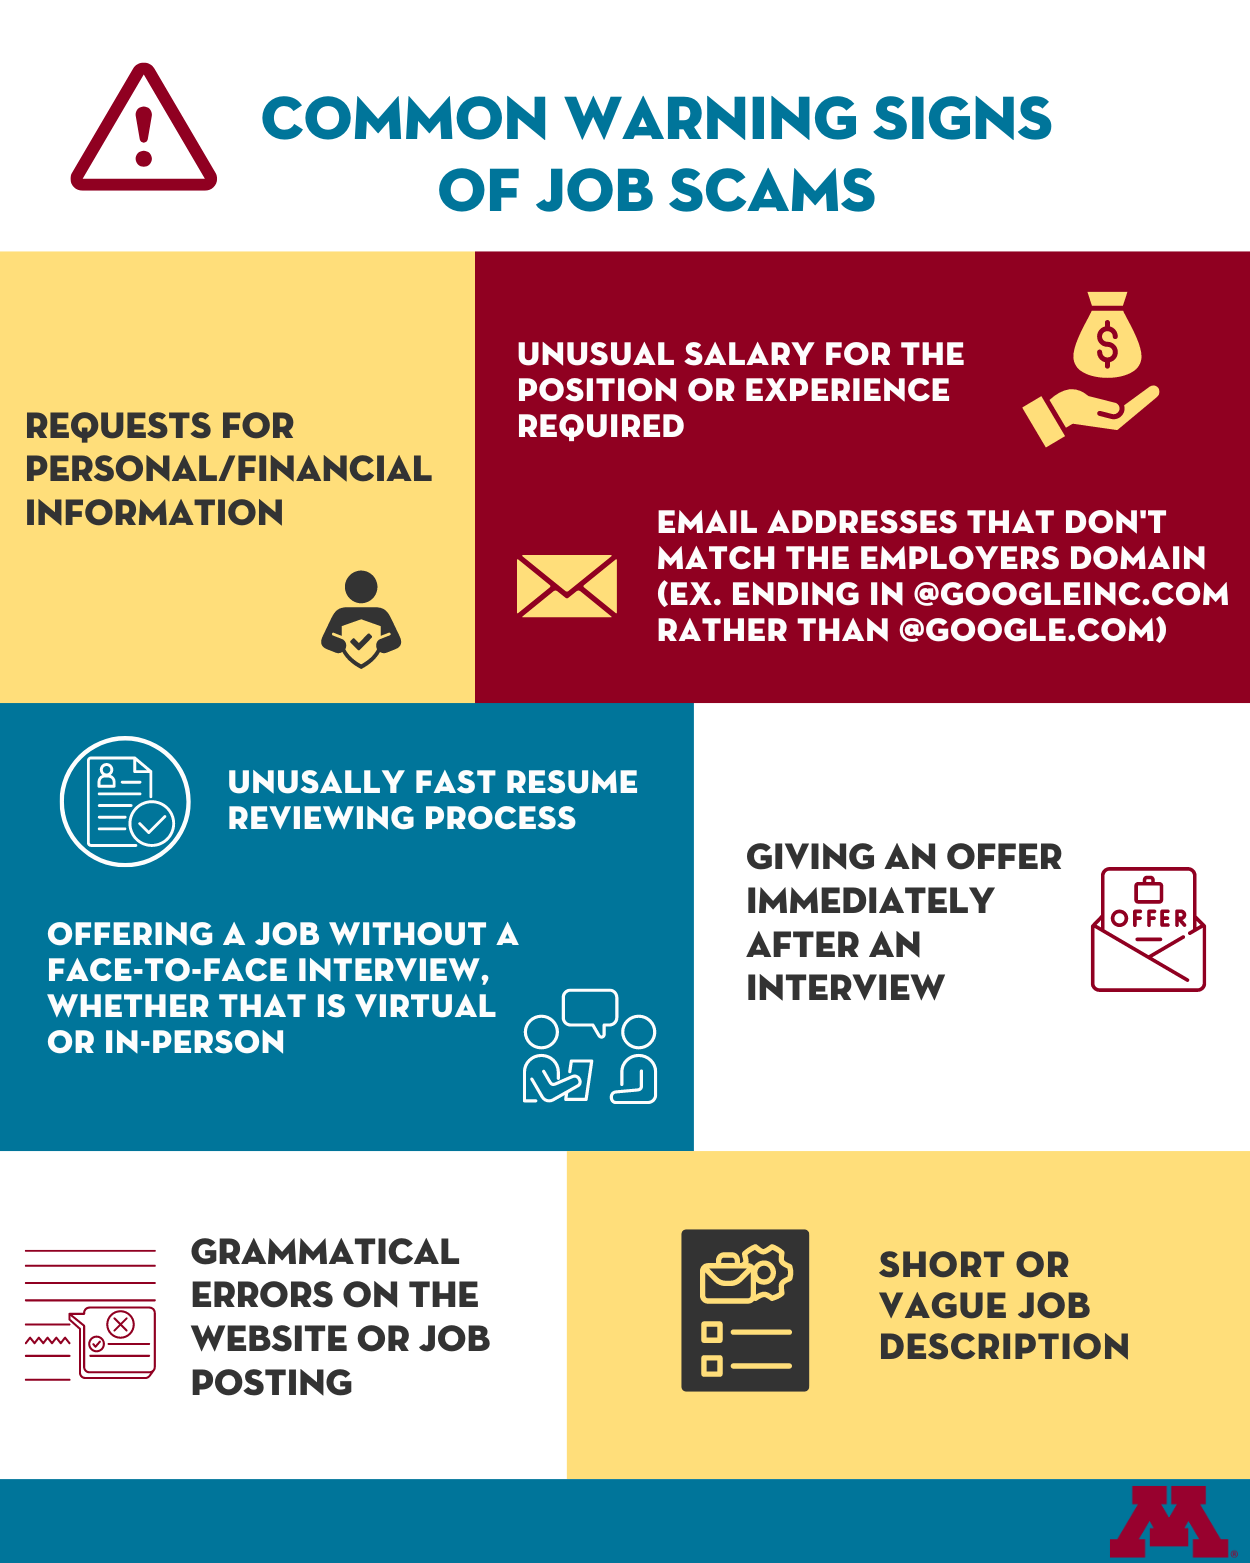 Infographic of common warning signs of job scams which can be found on the job scam info page.